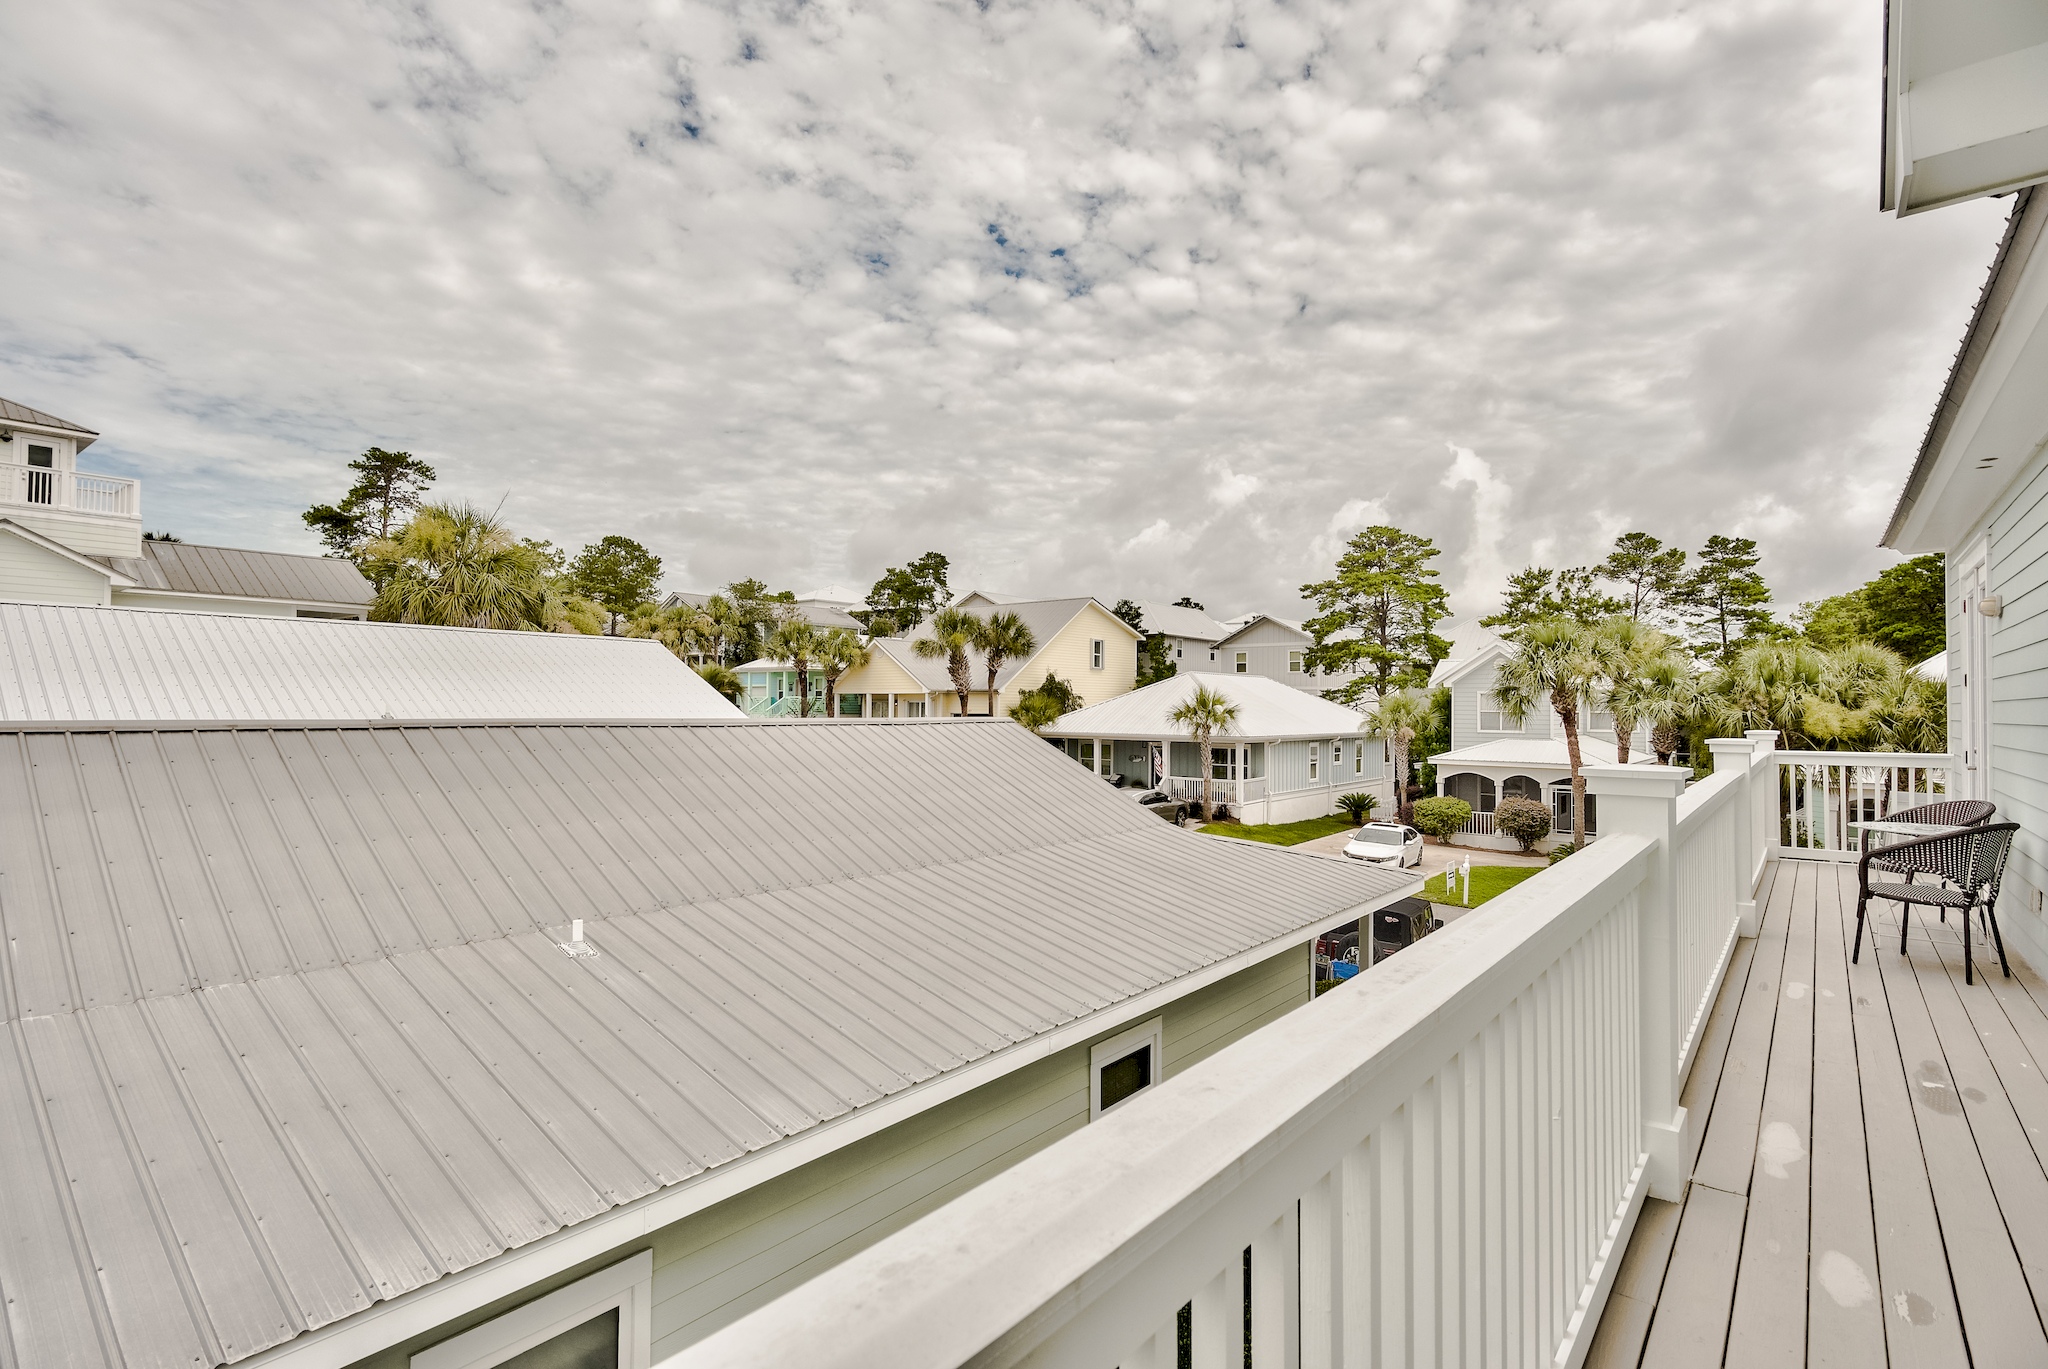 VayKshun House House / Cottage rental in 30a Beach House Rentals in Highway 30-A Florida - #36